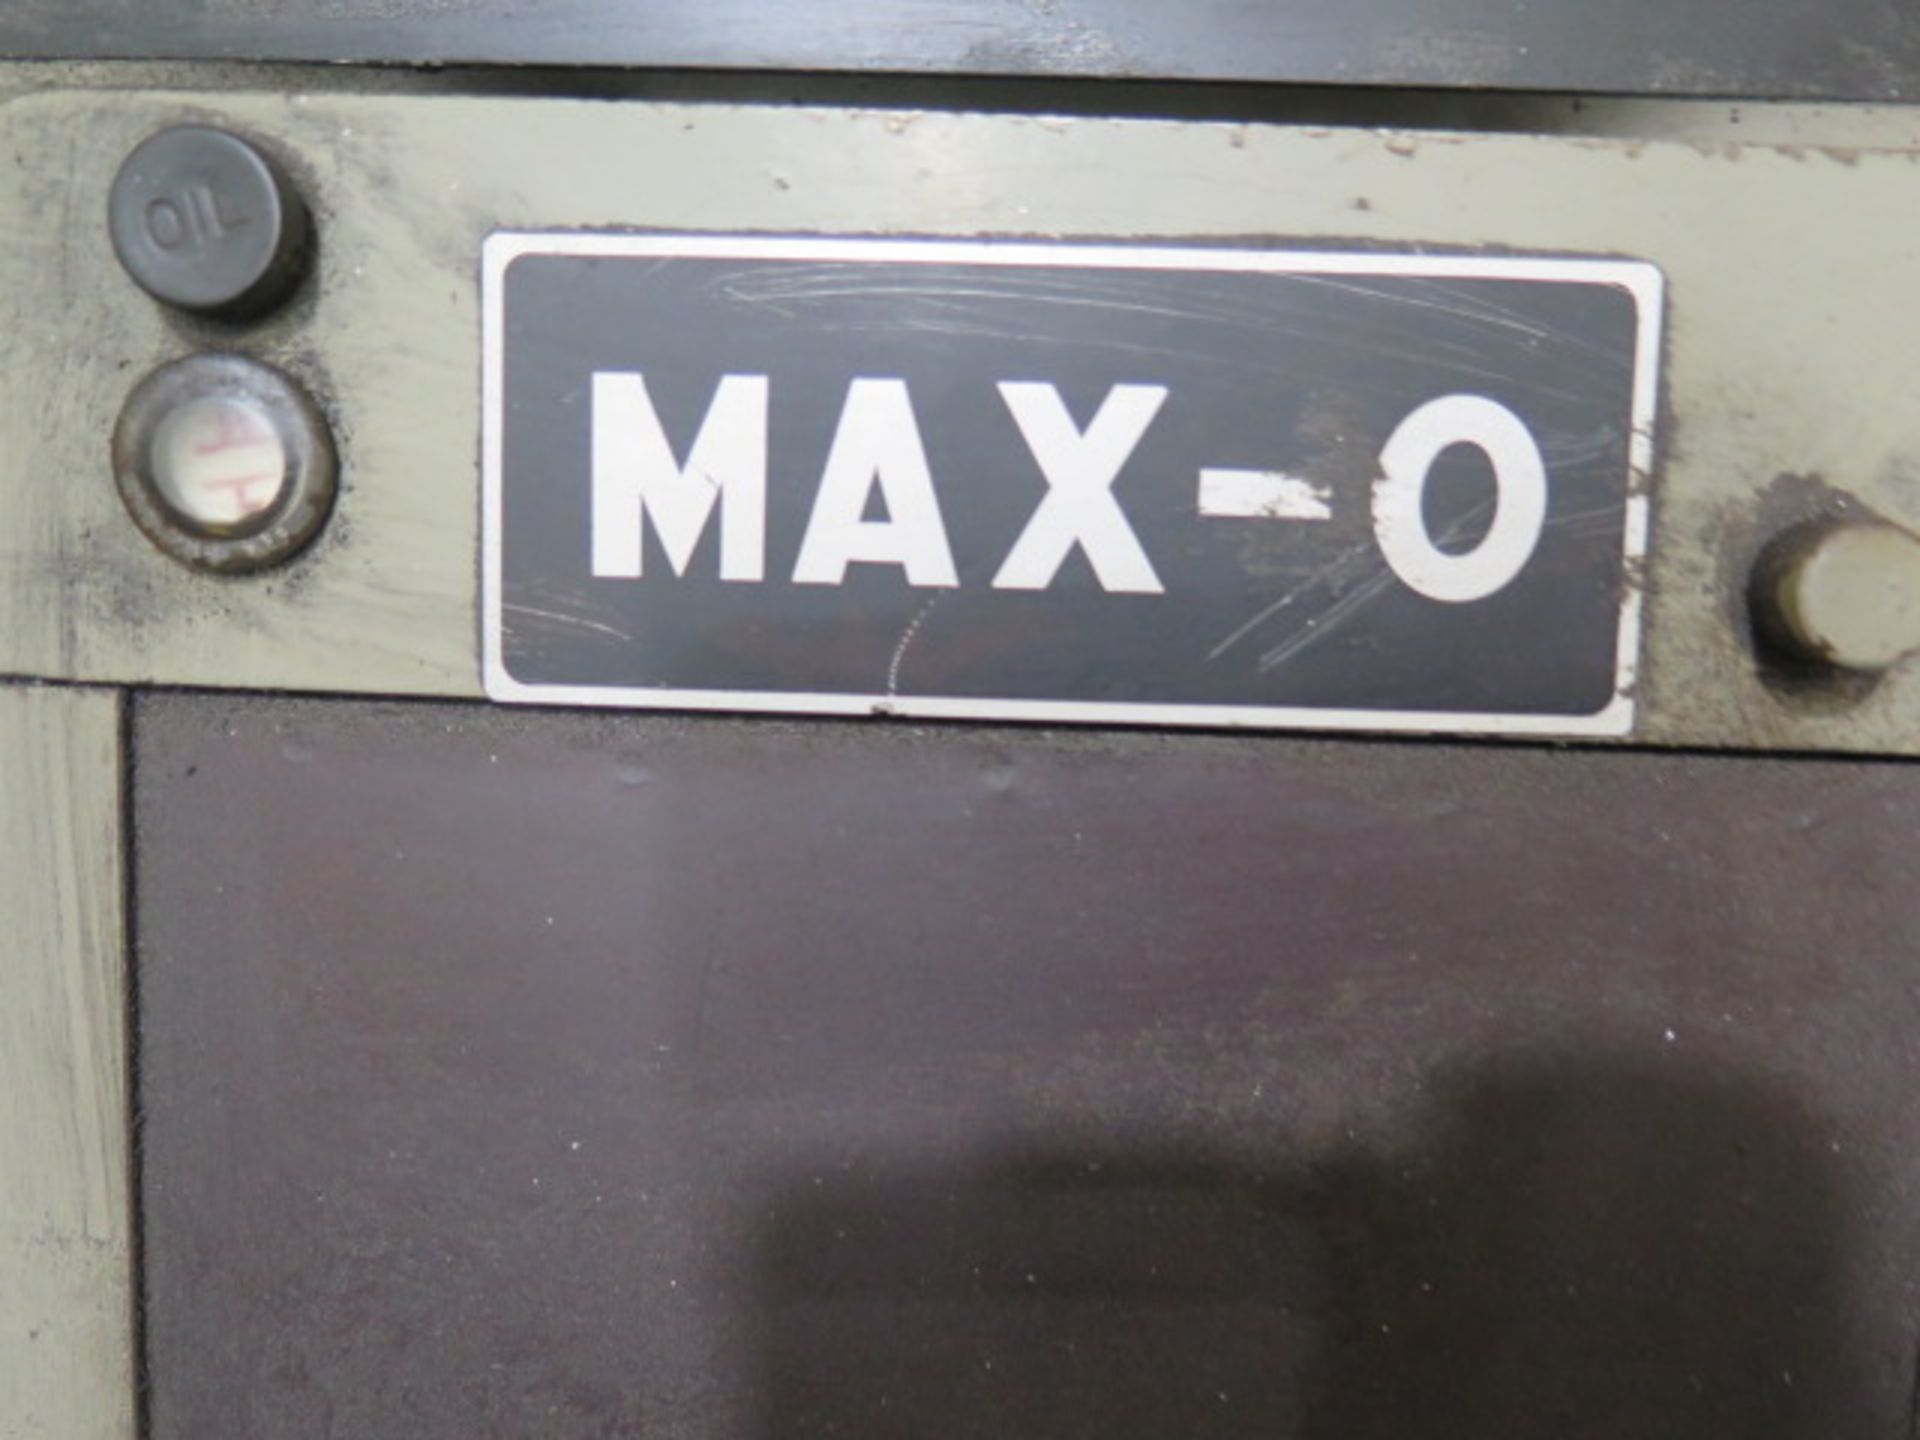 Max-O 6" x 18" Surface Grinder w/ Pathfinder DRO, 6" x 18" Magnetic Chuck - Image 3 of 6